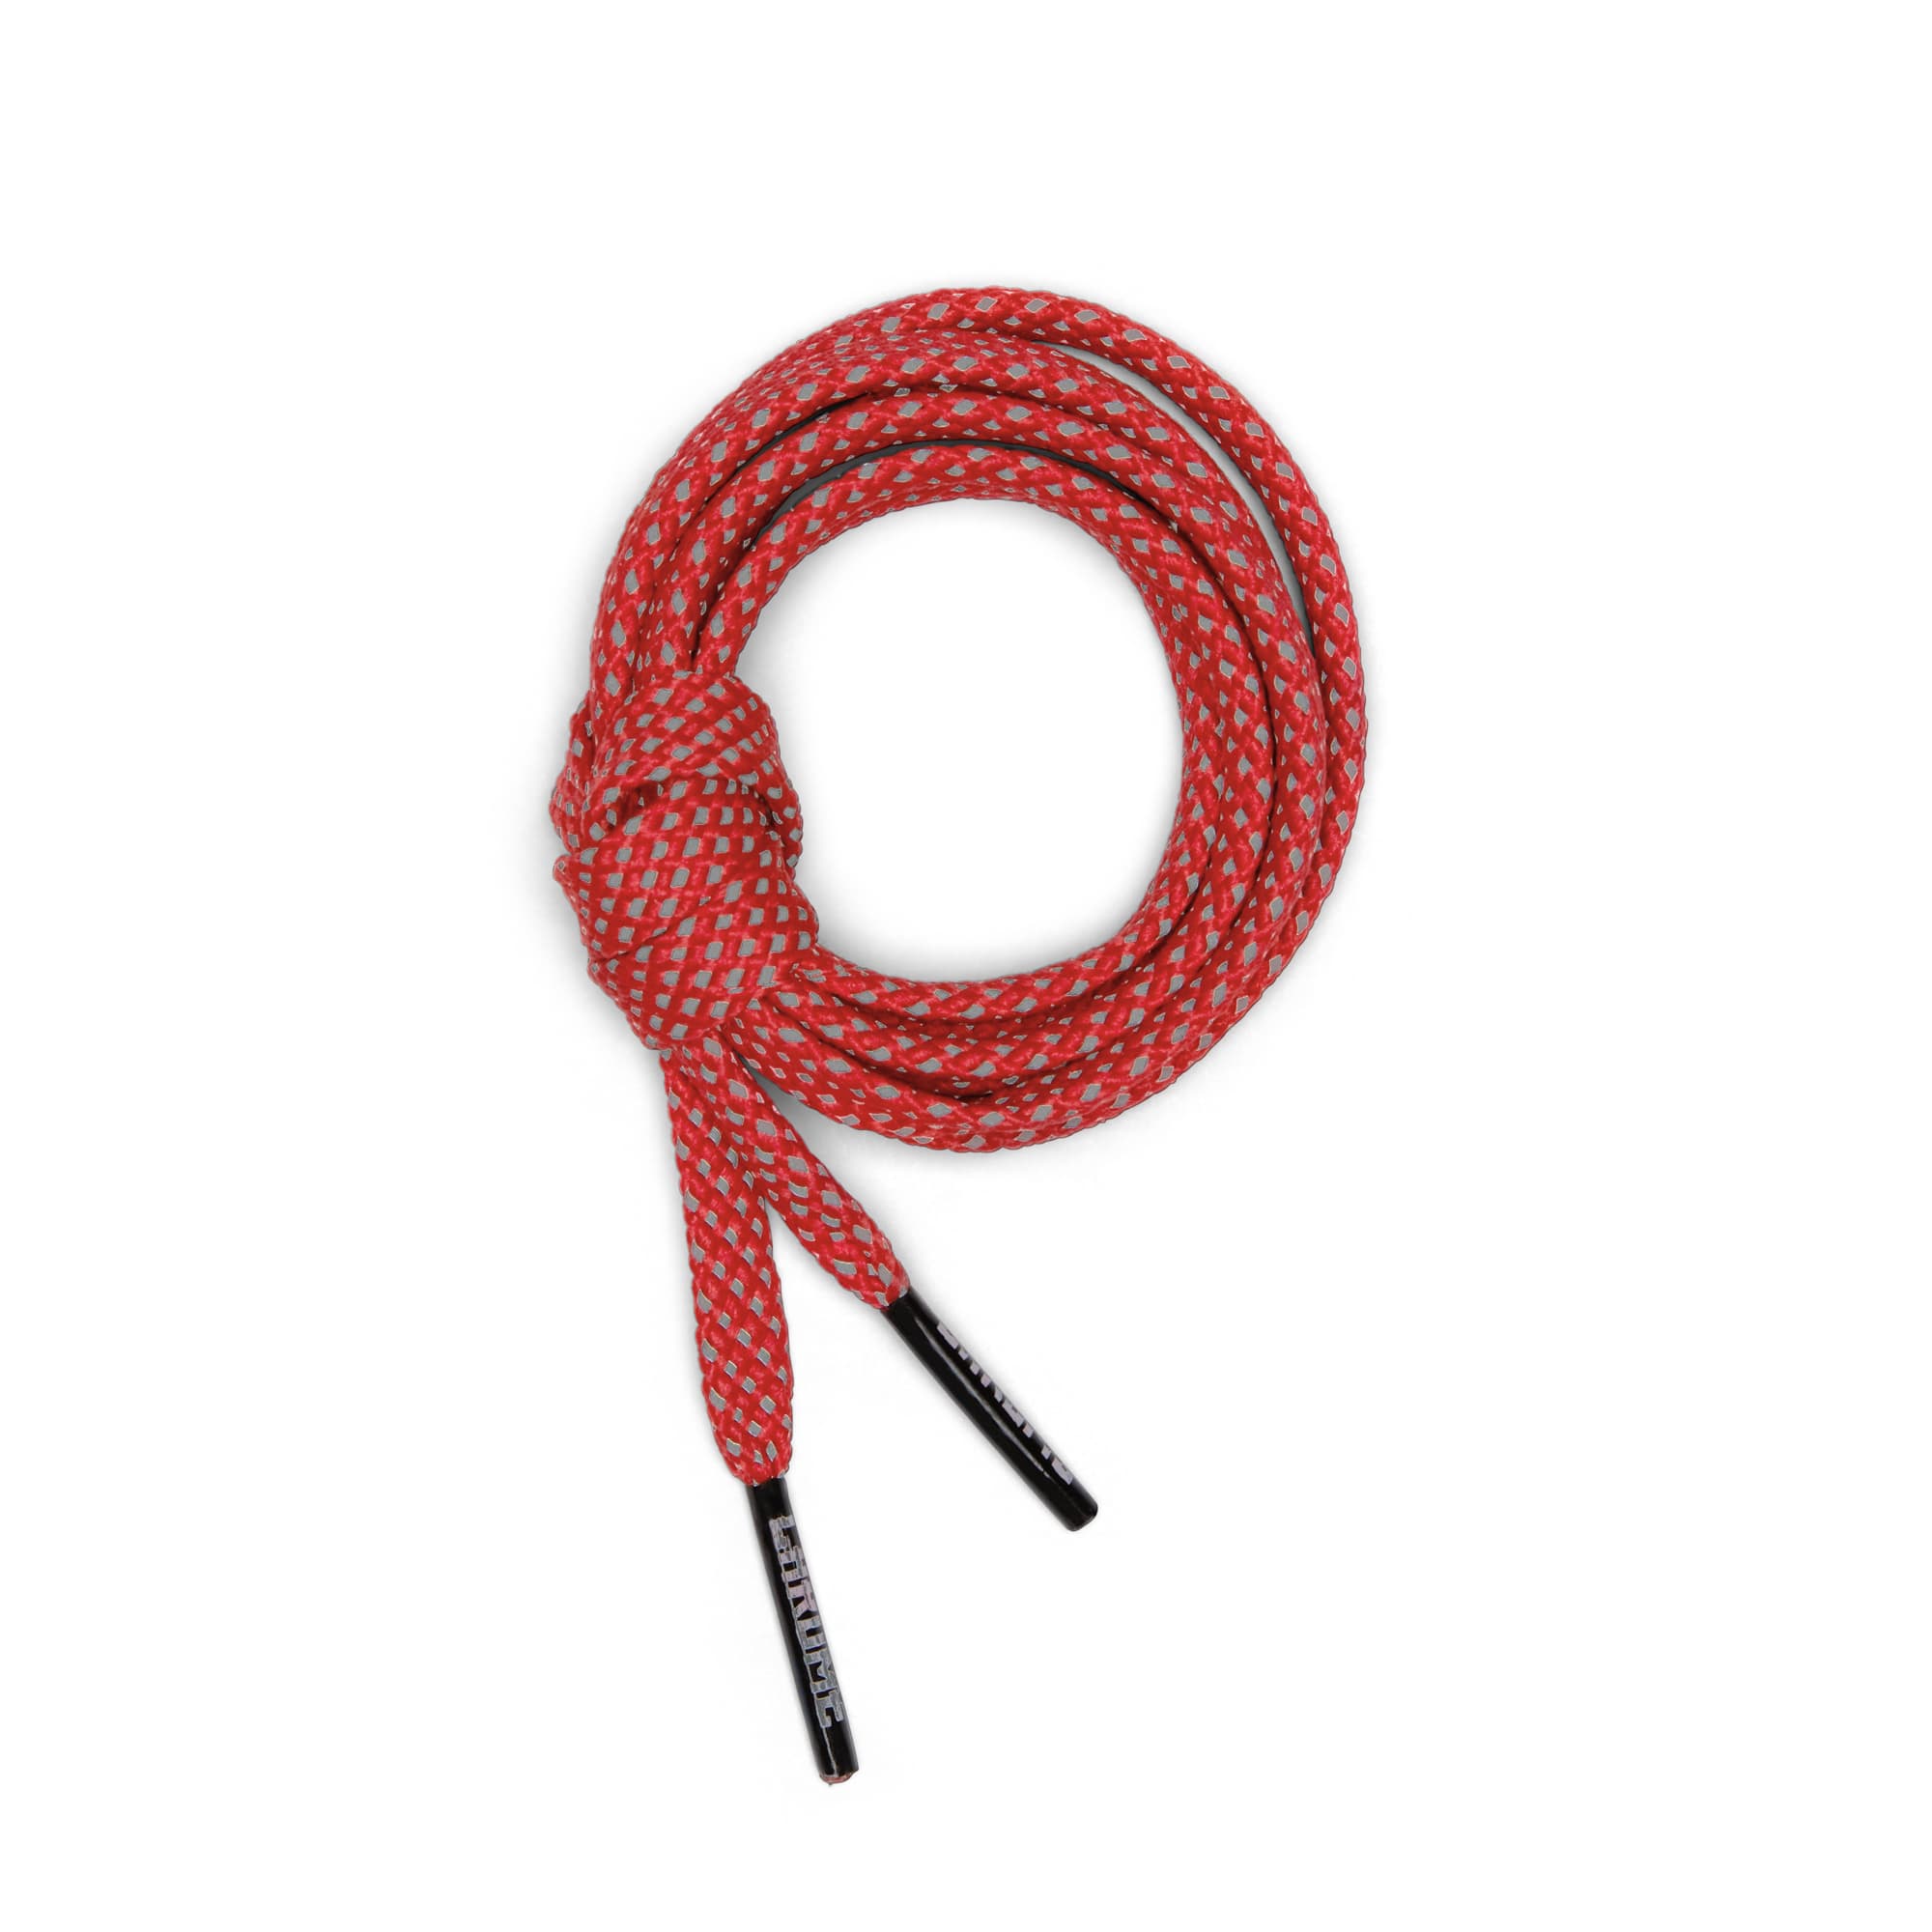 Reflective Flat Shoe Laces in red rolled up #color_red reflective